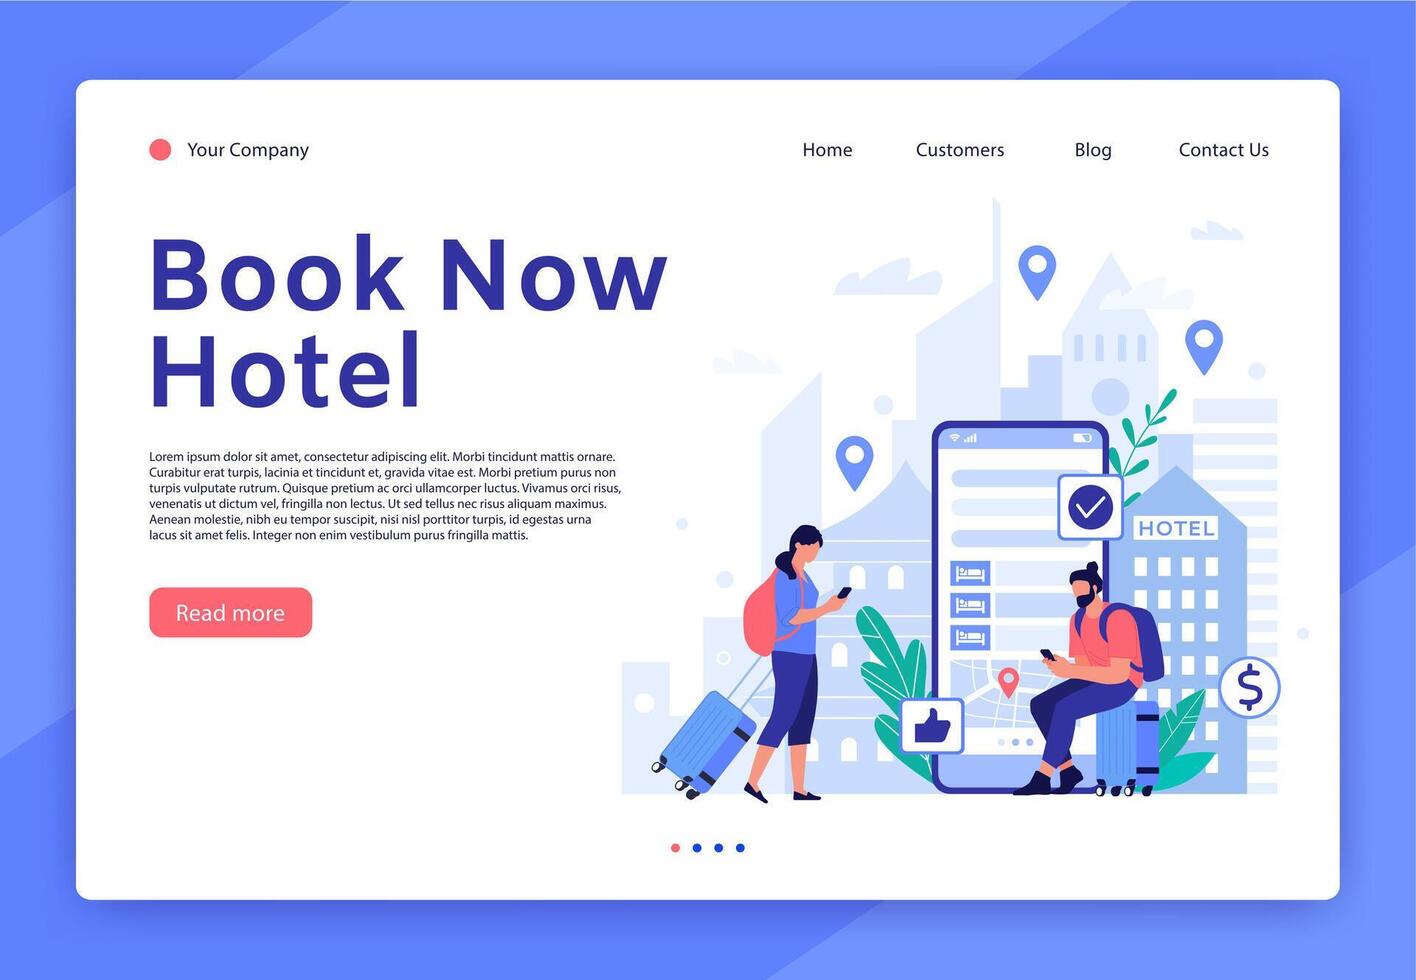 Hotel booking website. Mobile app for tourists and travellers, hotel room reservation digital service concept vector landing page template. Apartment search tool. People with luggage illustration